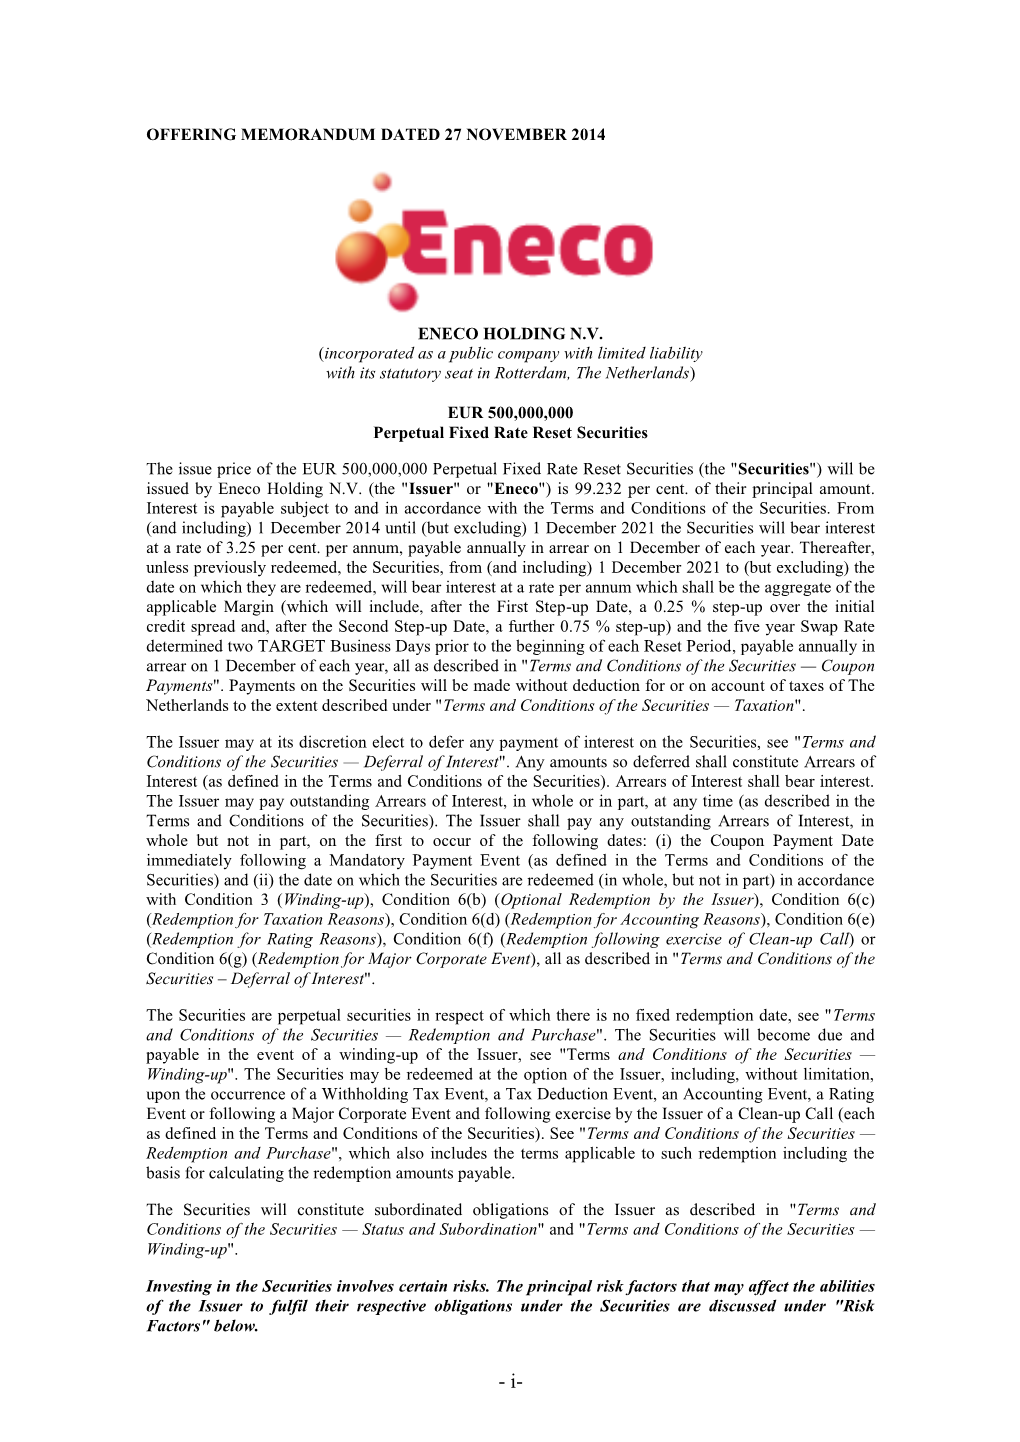 OFFERING MEMORANDUM DATED 27 NOVEMBER 2014 ENECO HOLDING N.V. (Incorporated As a Public Company with Limited Liability With